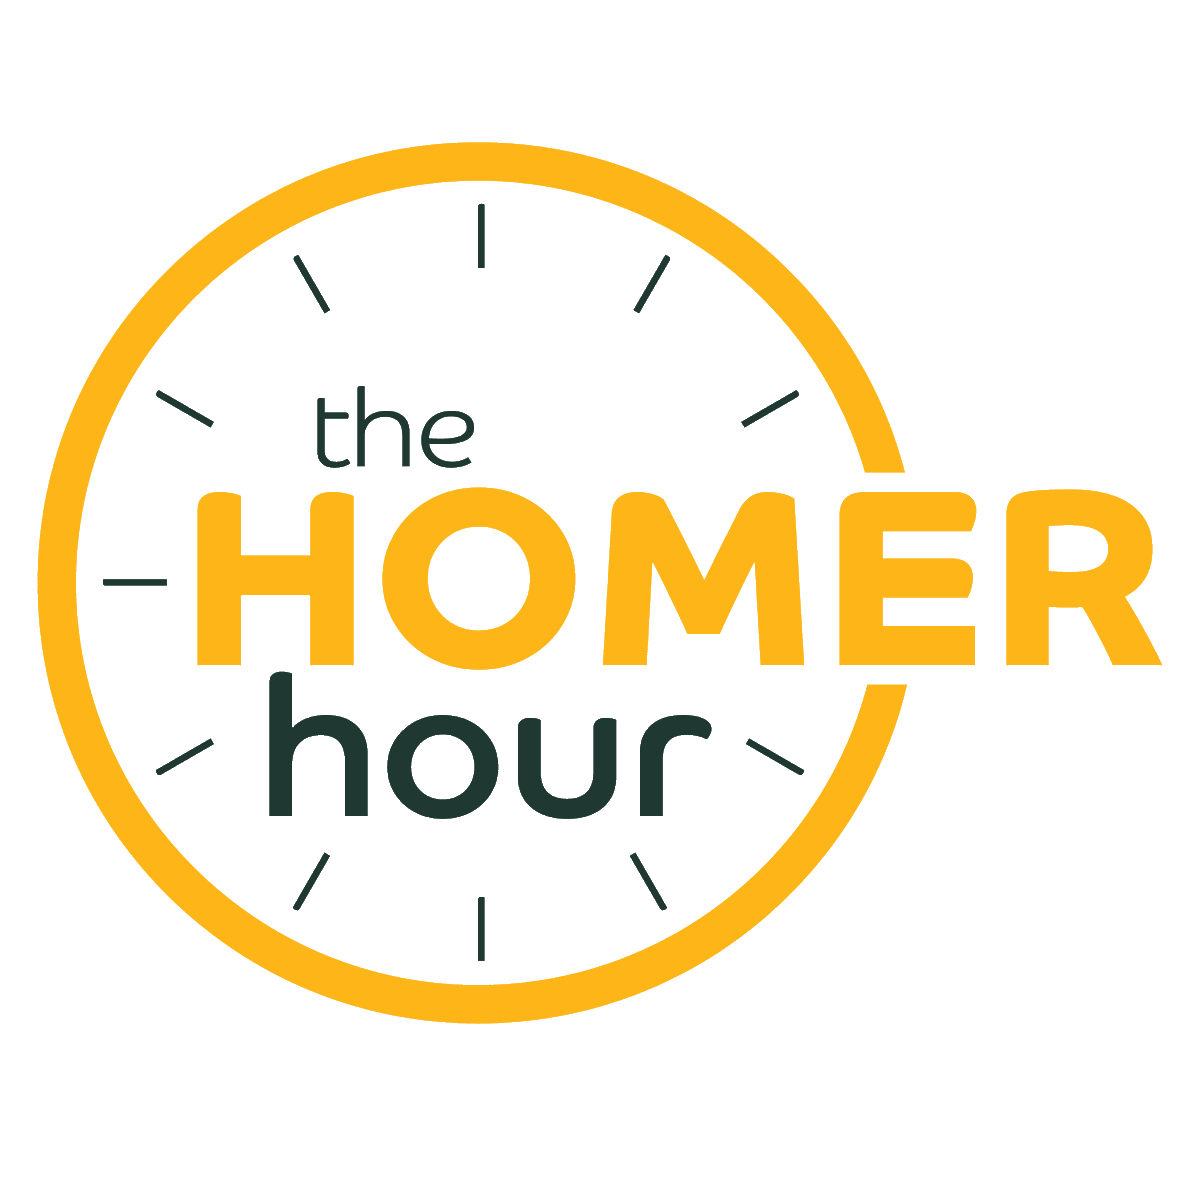 🚨 NEW LINEUP 🚨 Starting on Monday, September 11th! From 2p - 5p we will have @KWALL1224, @BenBrust and @BradNortmanisms on our NEW show 'Kyle, Brust and Nortman!' From 5p-6p we will have @espnhomer with 'The Homer Hour' featuring @BBulaga and John Anderson!